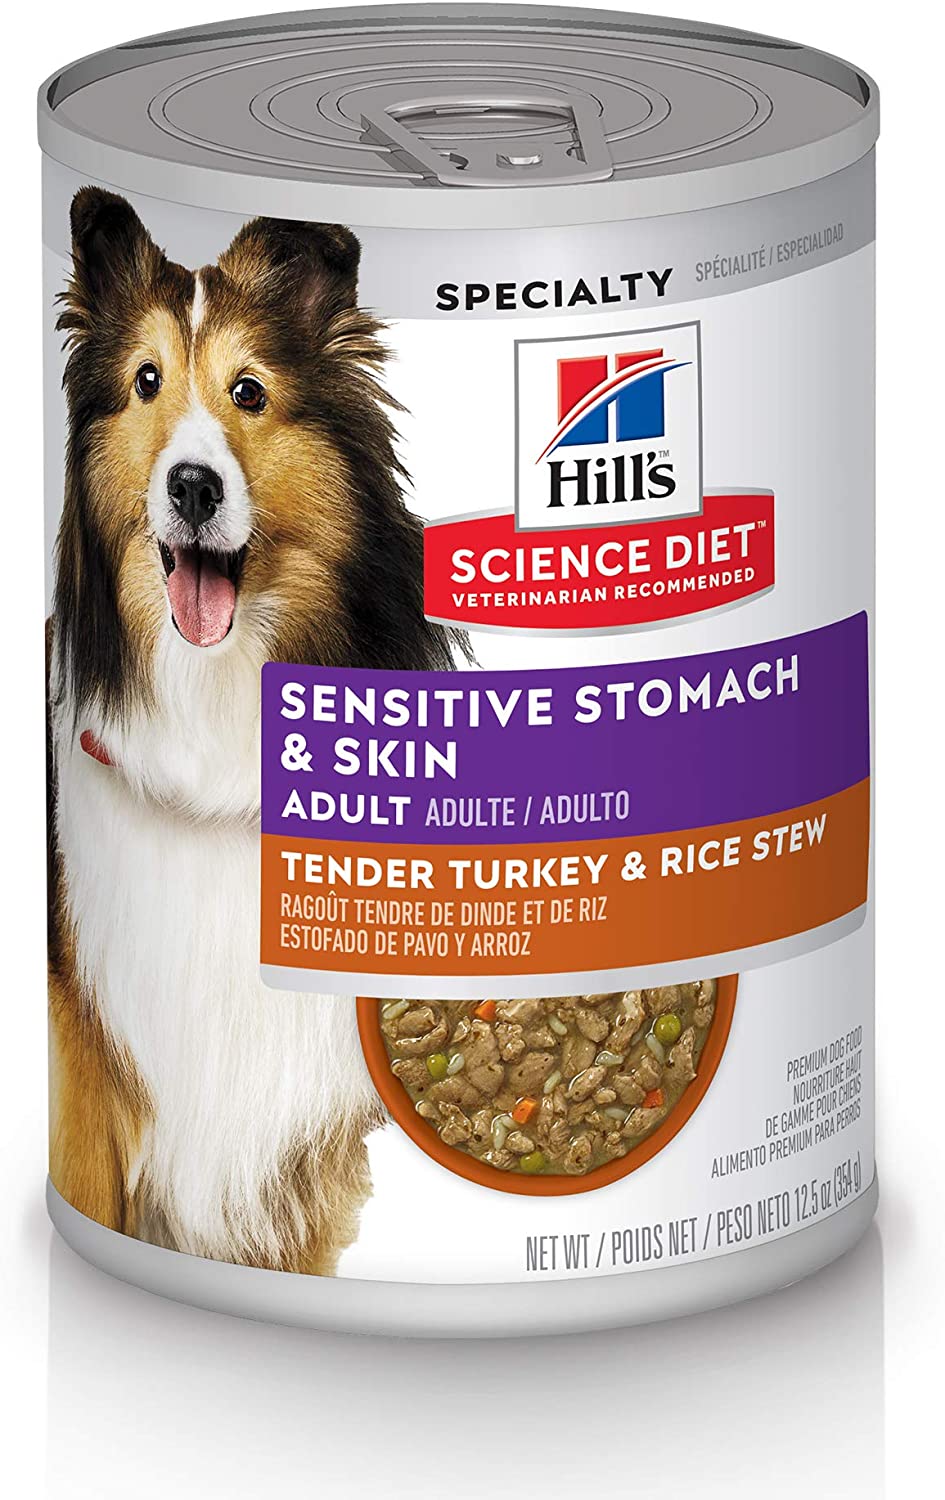 What is the best food to feed a dog with a sensitive stomach?